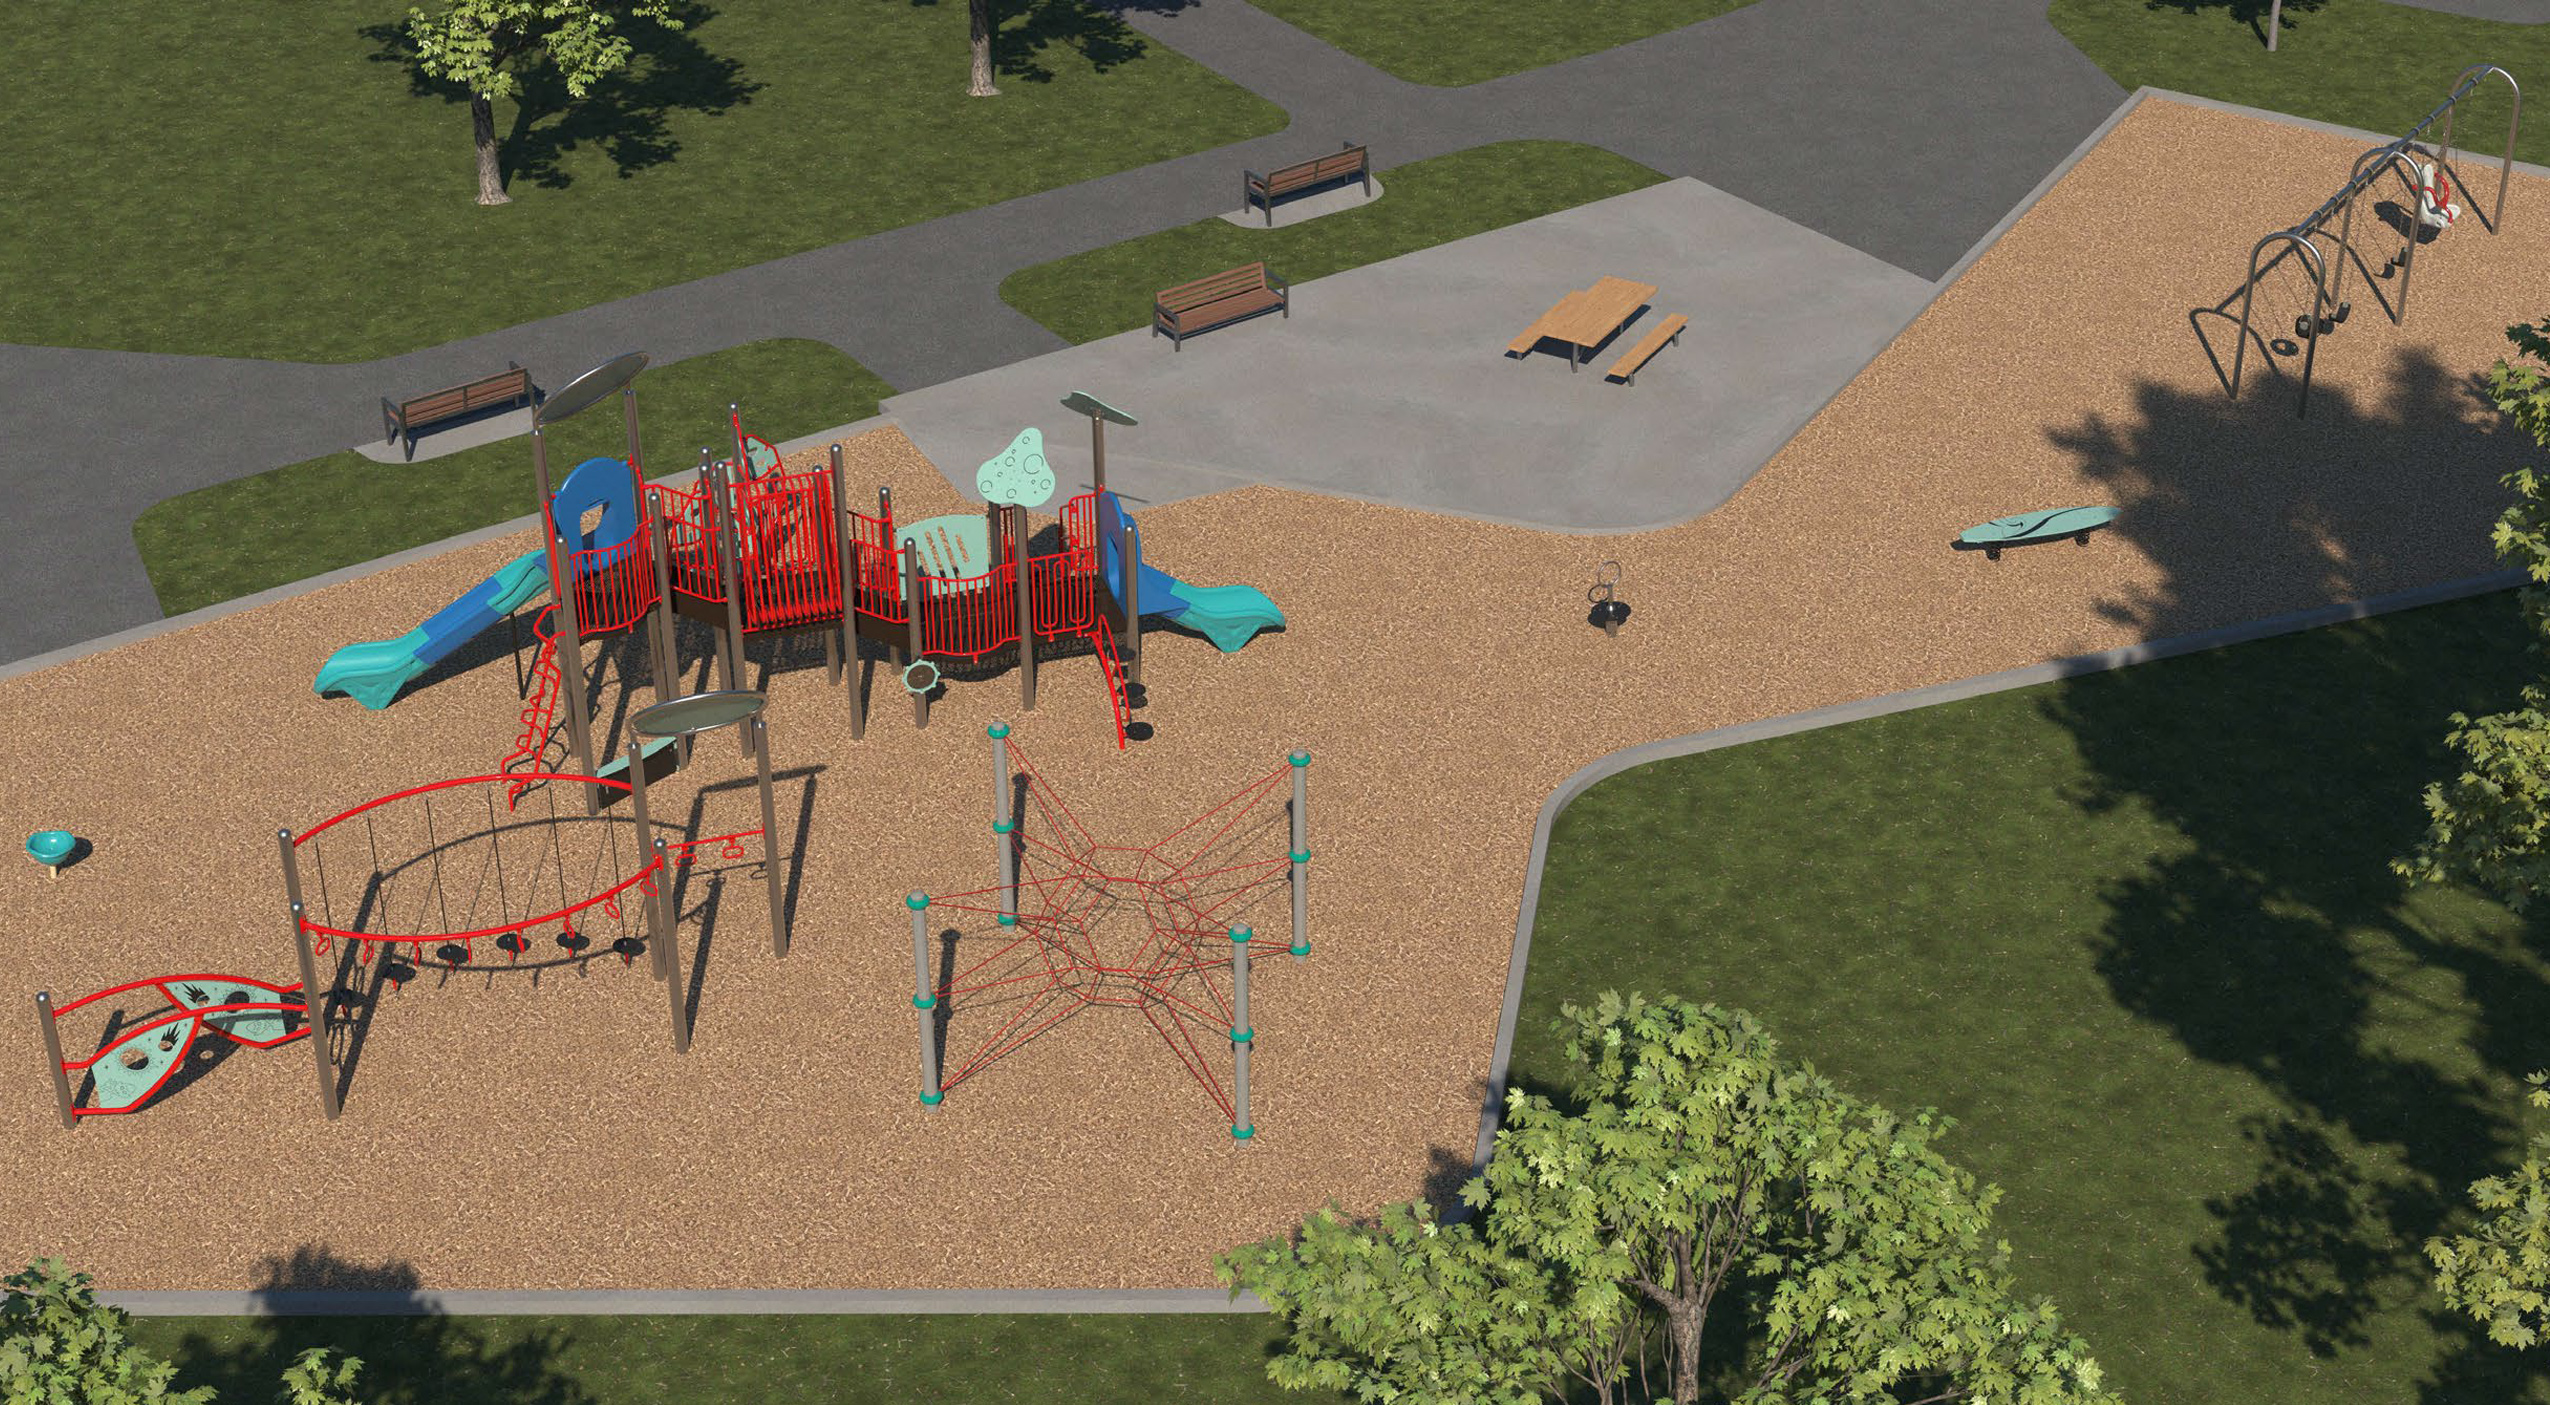 A rendering of playground Design D. From left to right: spinner toy, climbing structure, combined play structure, another climbing structure, spinner toy, surfboard toy, swings. A picnic table is displayed. Design is further described following the image.